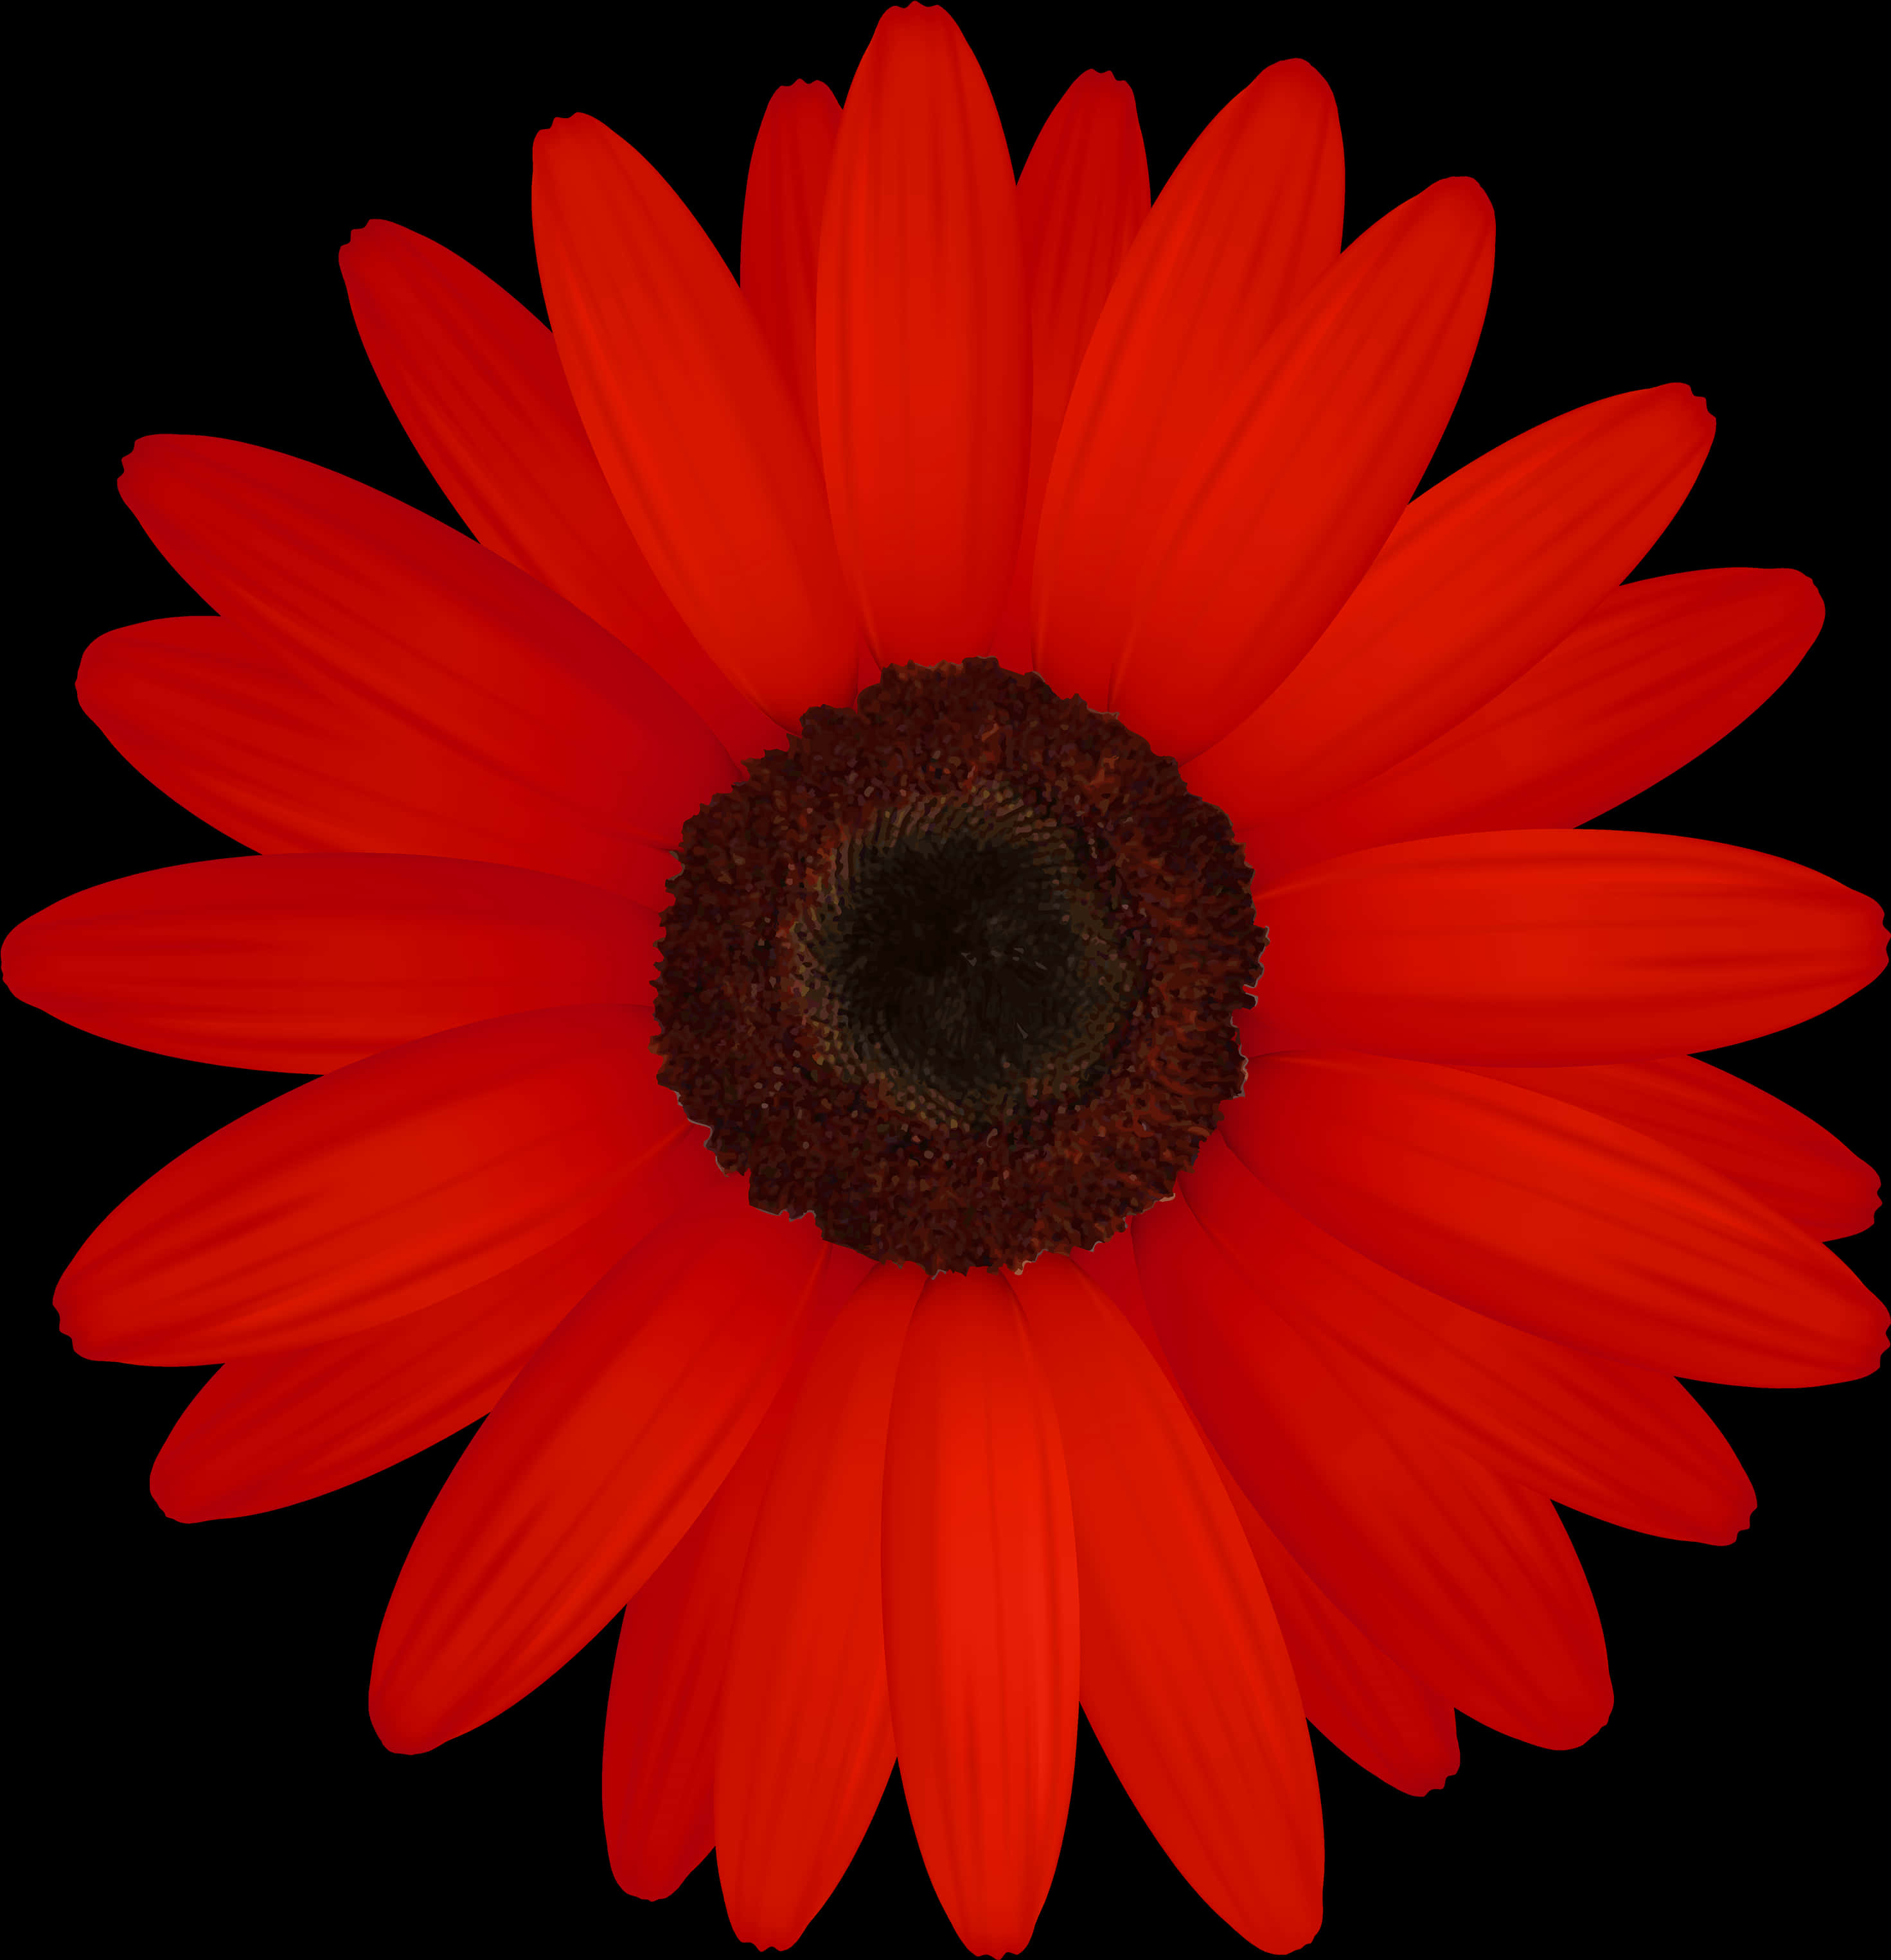 Vibrant Red Daisy Black Background.jpg PNG